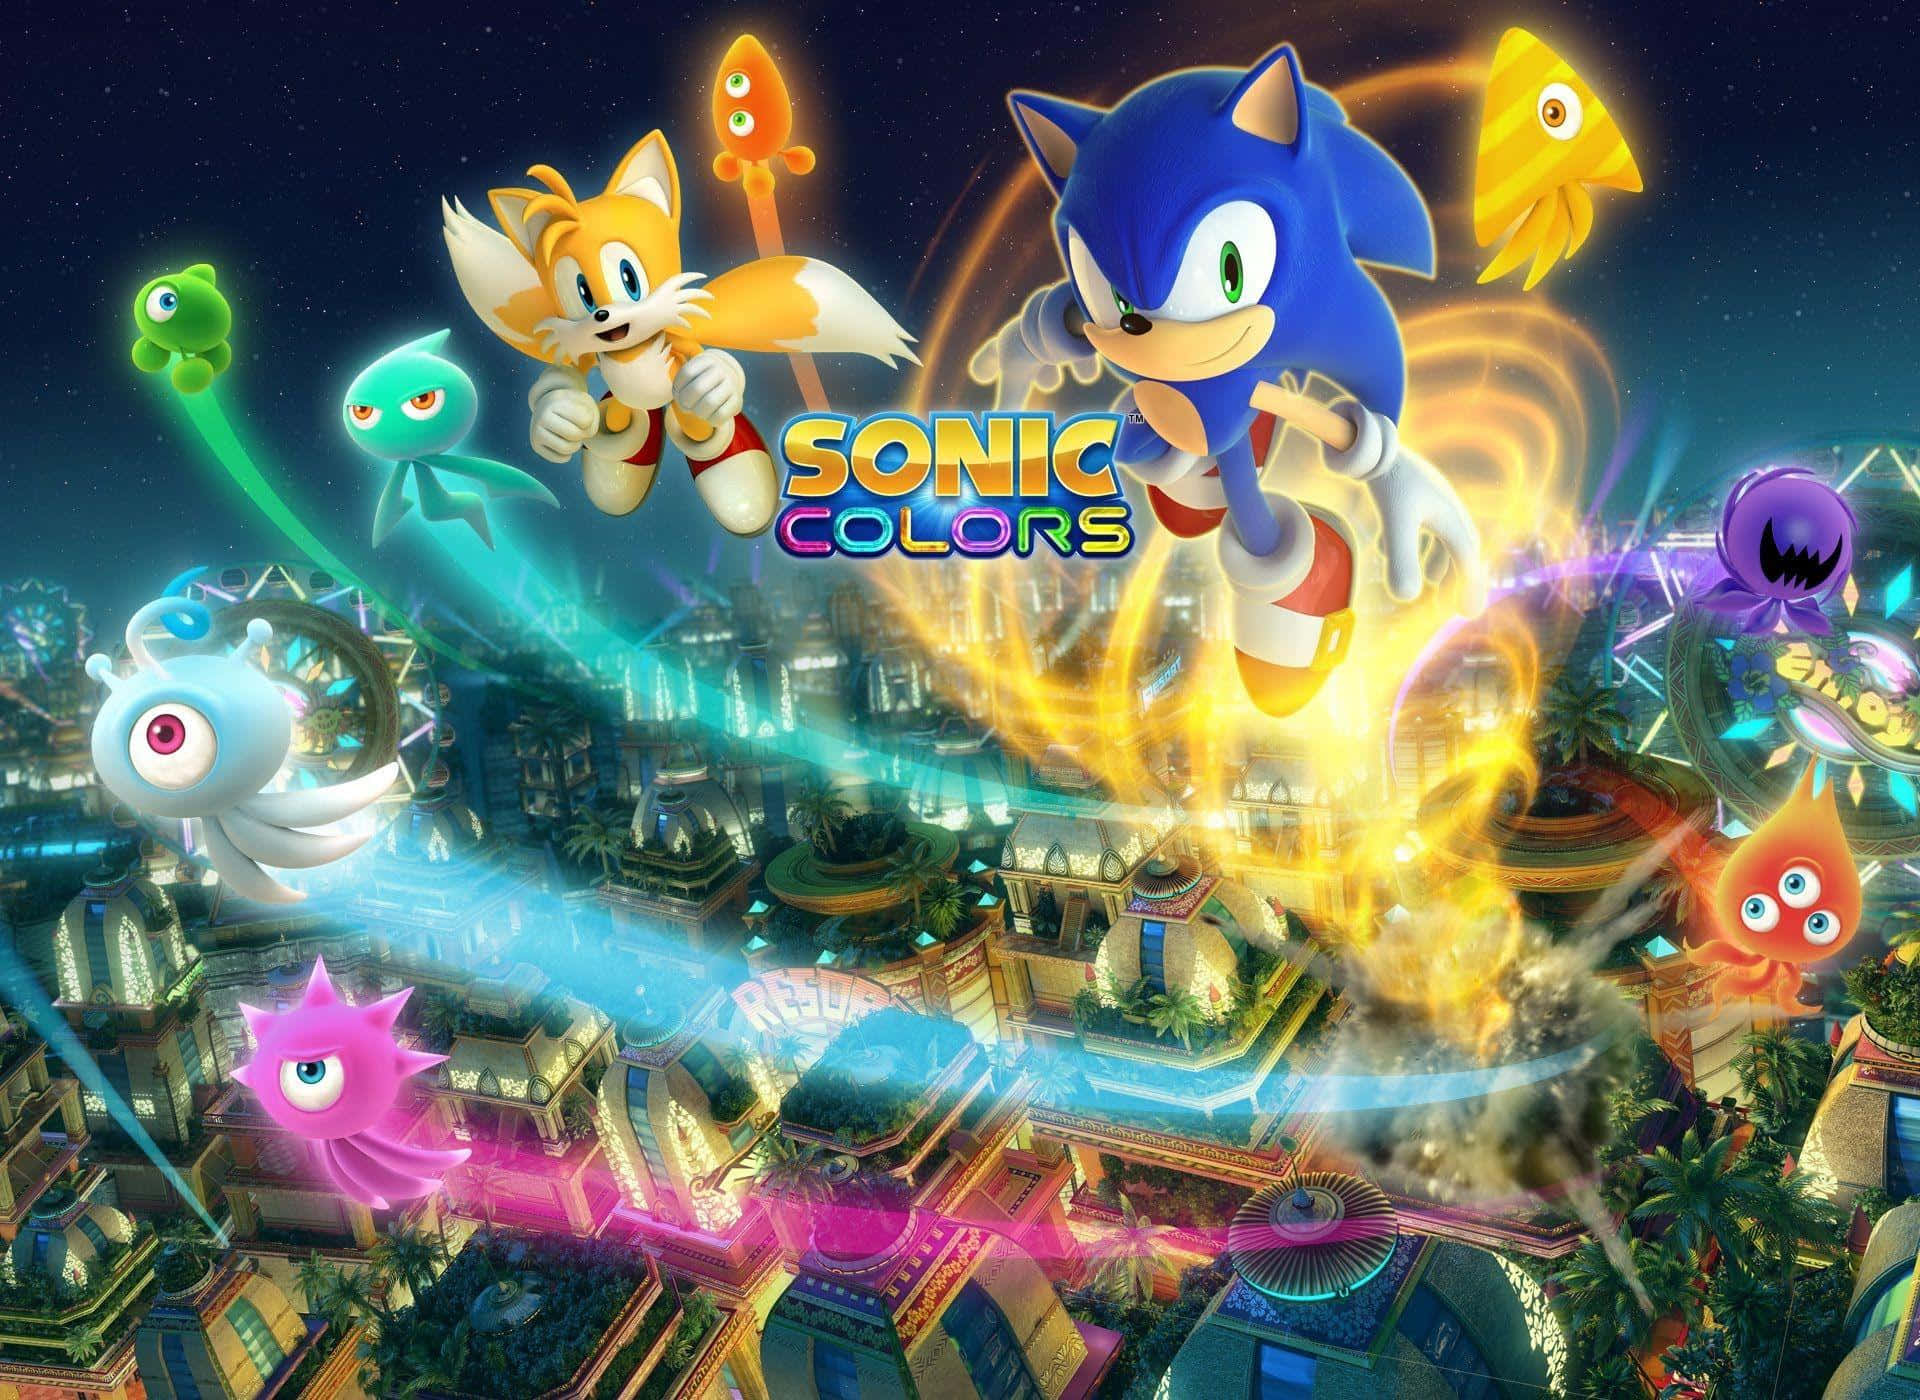 Start your adventure with the classic classic Sonic The Hedgehog in 4K! Wallpaper